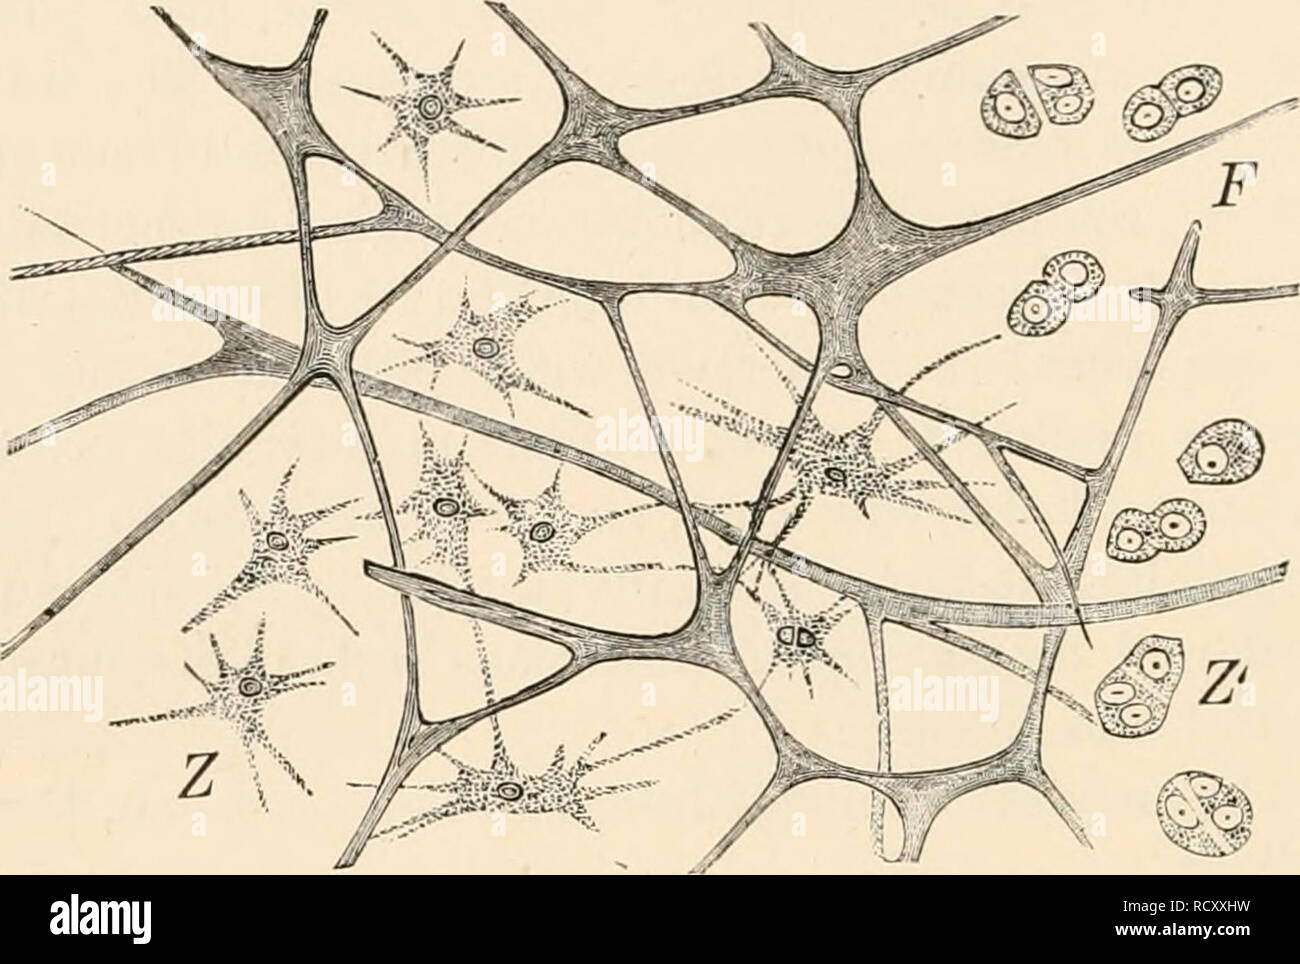 . Elementary text-book of zoology. Zoology. 38 GENERAL PART. phora). The so-called secreted tissue of young Ctenophora, and the gelatinous tissue of Medusae and Echinoderm larvse, into which cells eventually migrate, being at first absent, has a similar relation (fig. 26).. FIG. 26.—Gelatinous tissue of Rhizostorua. F, fibrous network ; Z, cells with processes ; Z', the same in division. Reticular connective tissue consists of a network of star-shaped and branched cells, the spaces of which contain another kind of tissue element. In the so-called adenoid tissue, which functions as the supporti Stock Photo